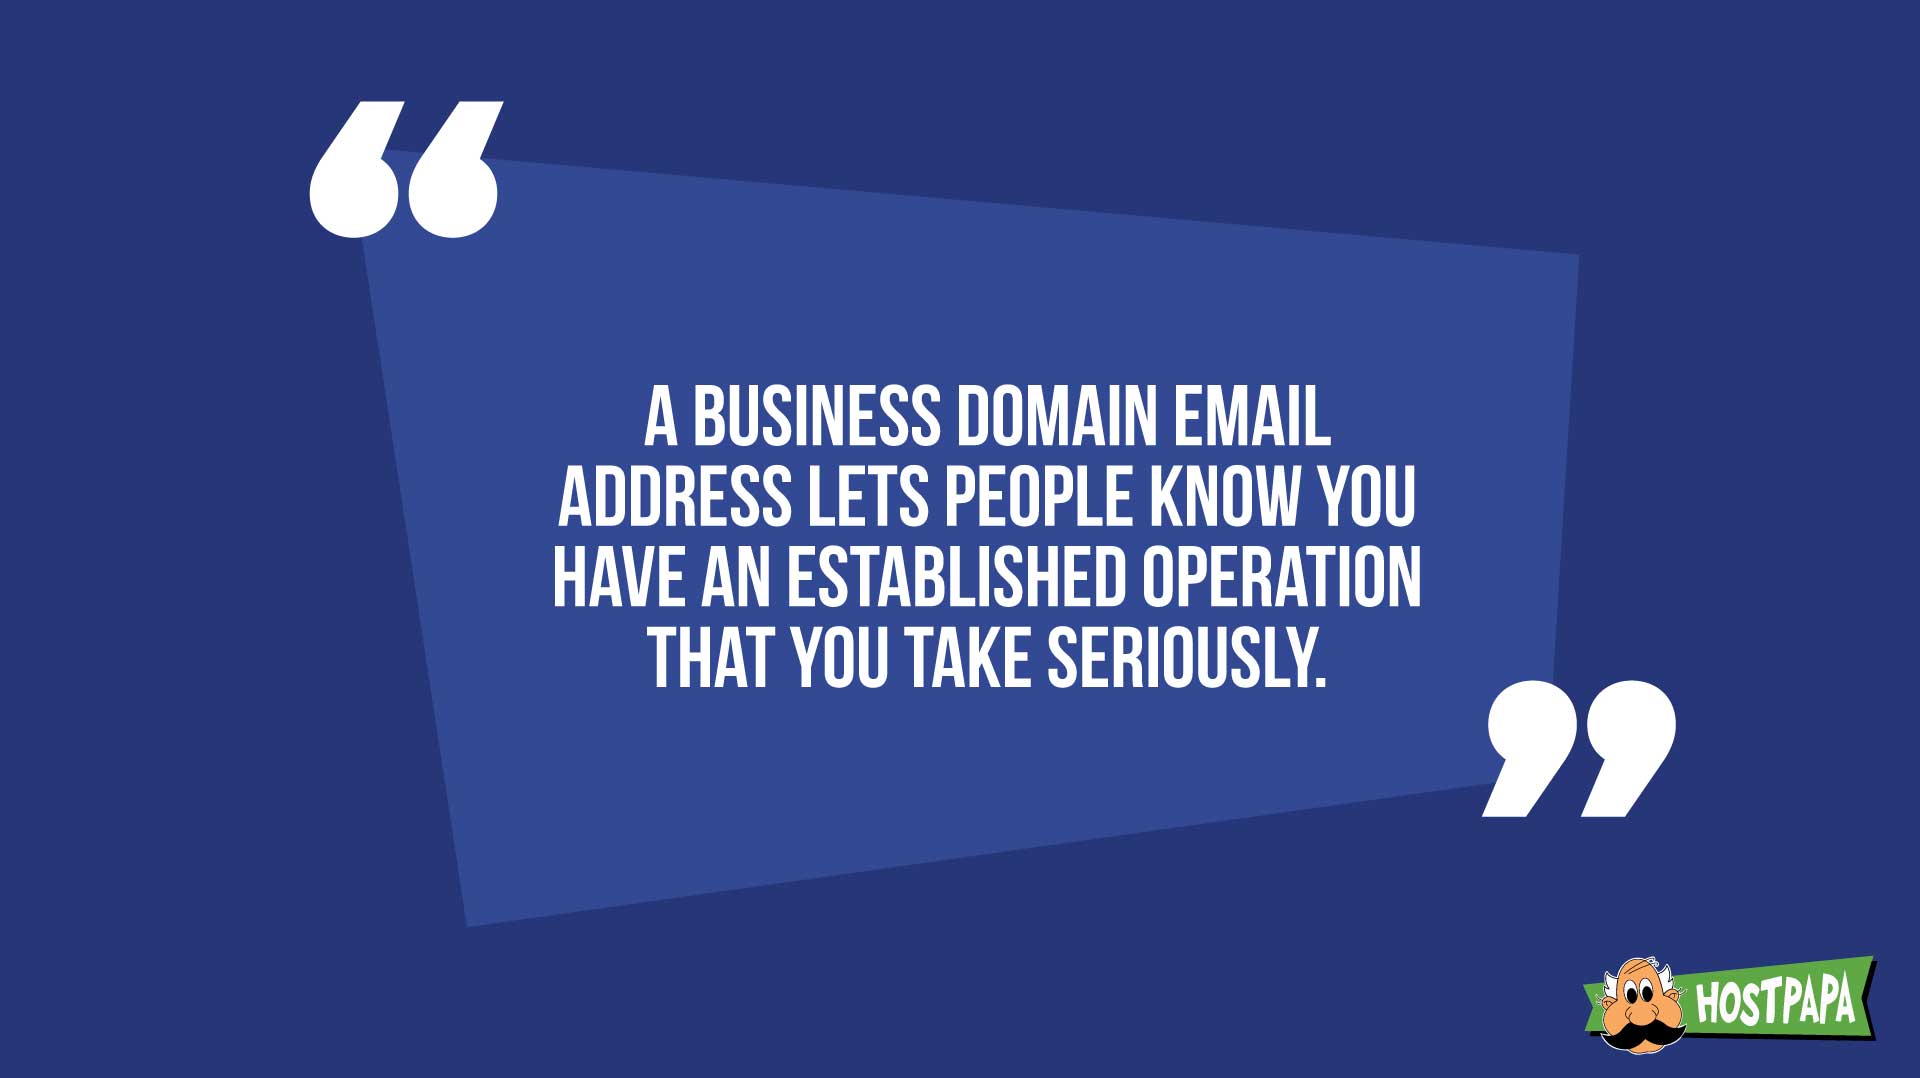 A business company email address lets people know you have an established operation that you take seriously